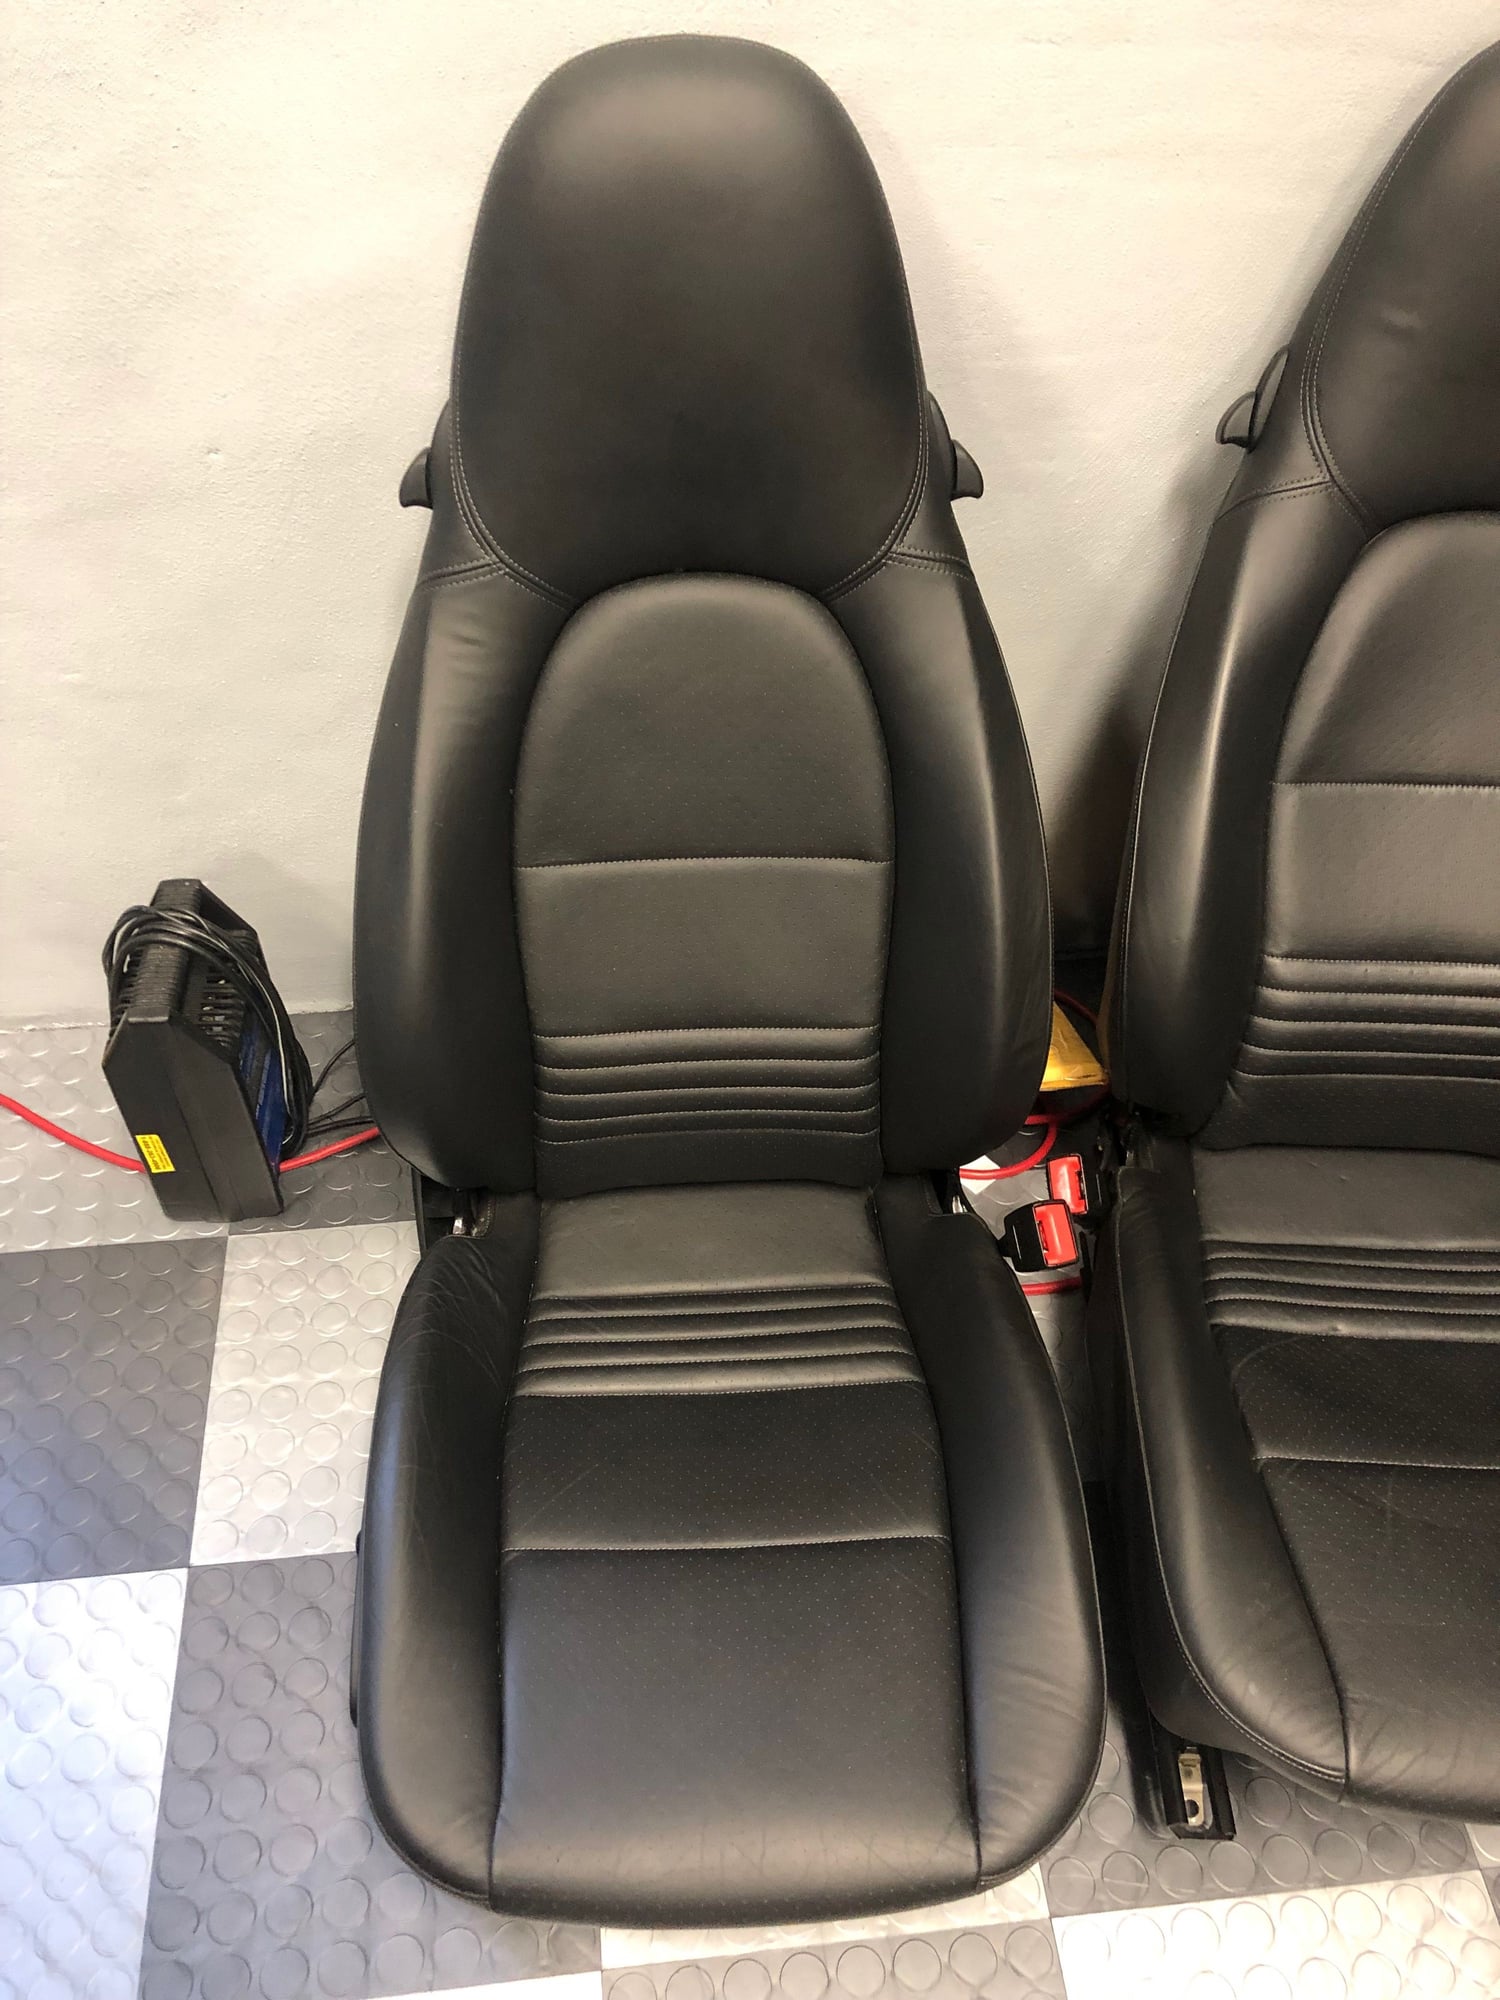 Interior/Upholstery - Black leather memory seats from my 2003 996 TT with 17k Miles - Used - 2000 to 2003 Porsche 911 - Davie, FL 33330, United States